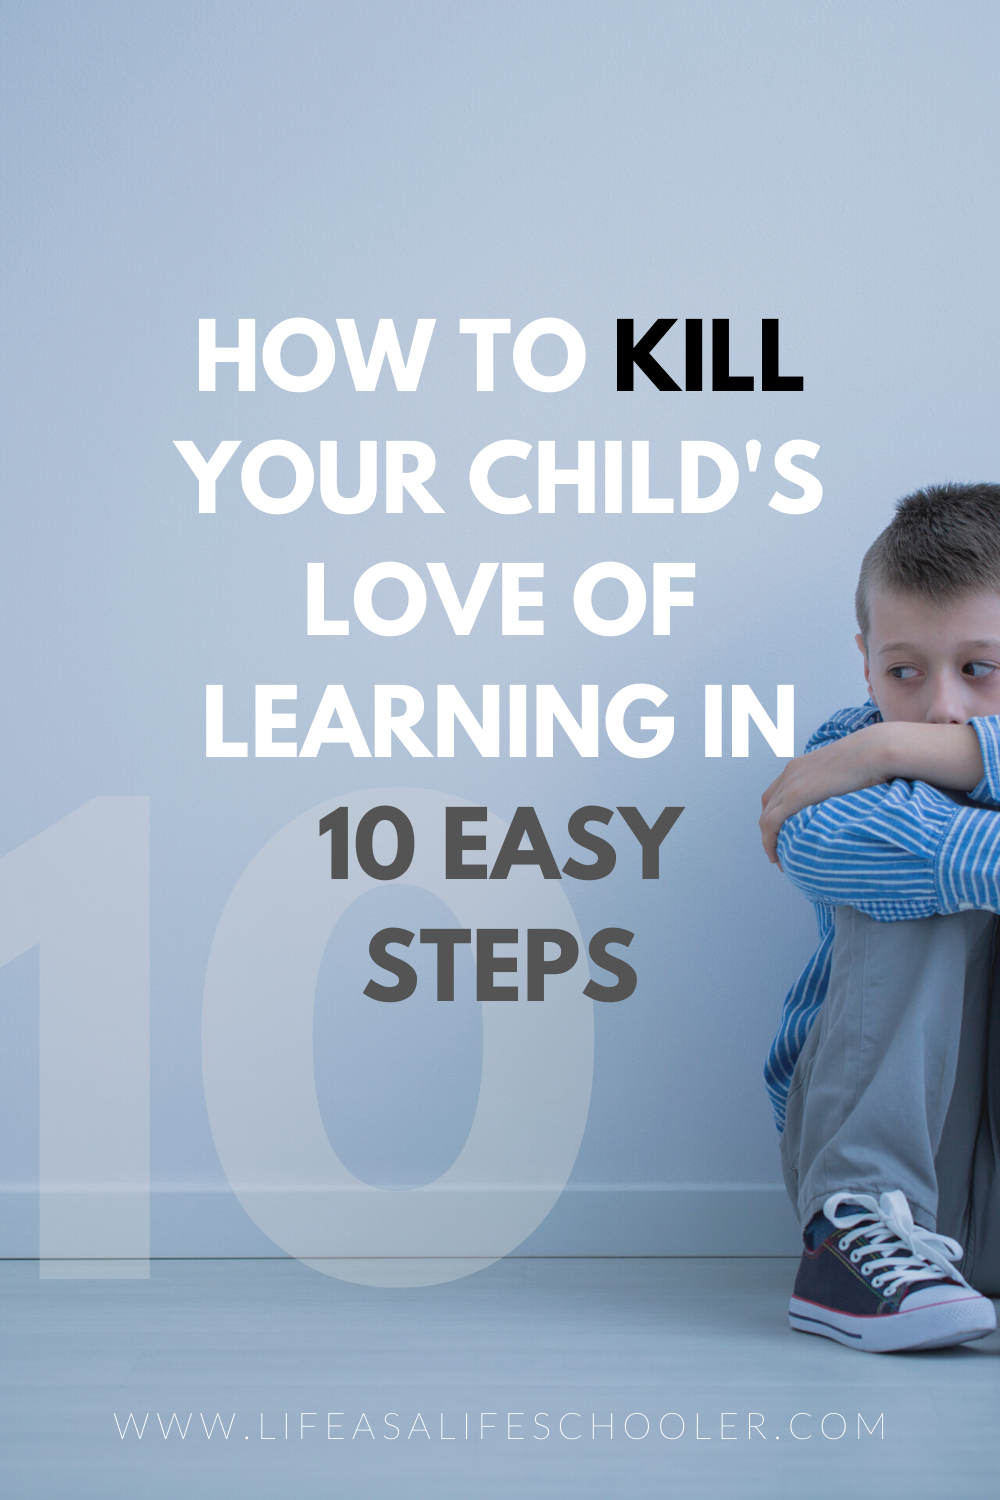 How to Kill Your Child’s Love of Learning in 10 Easy Steps